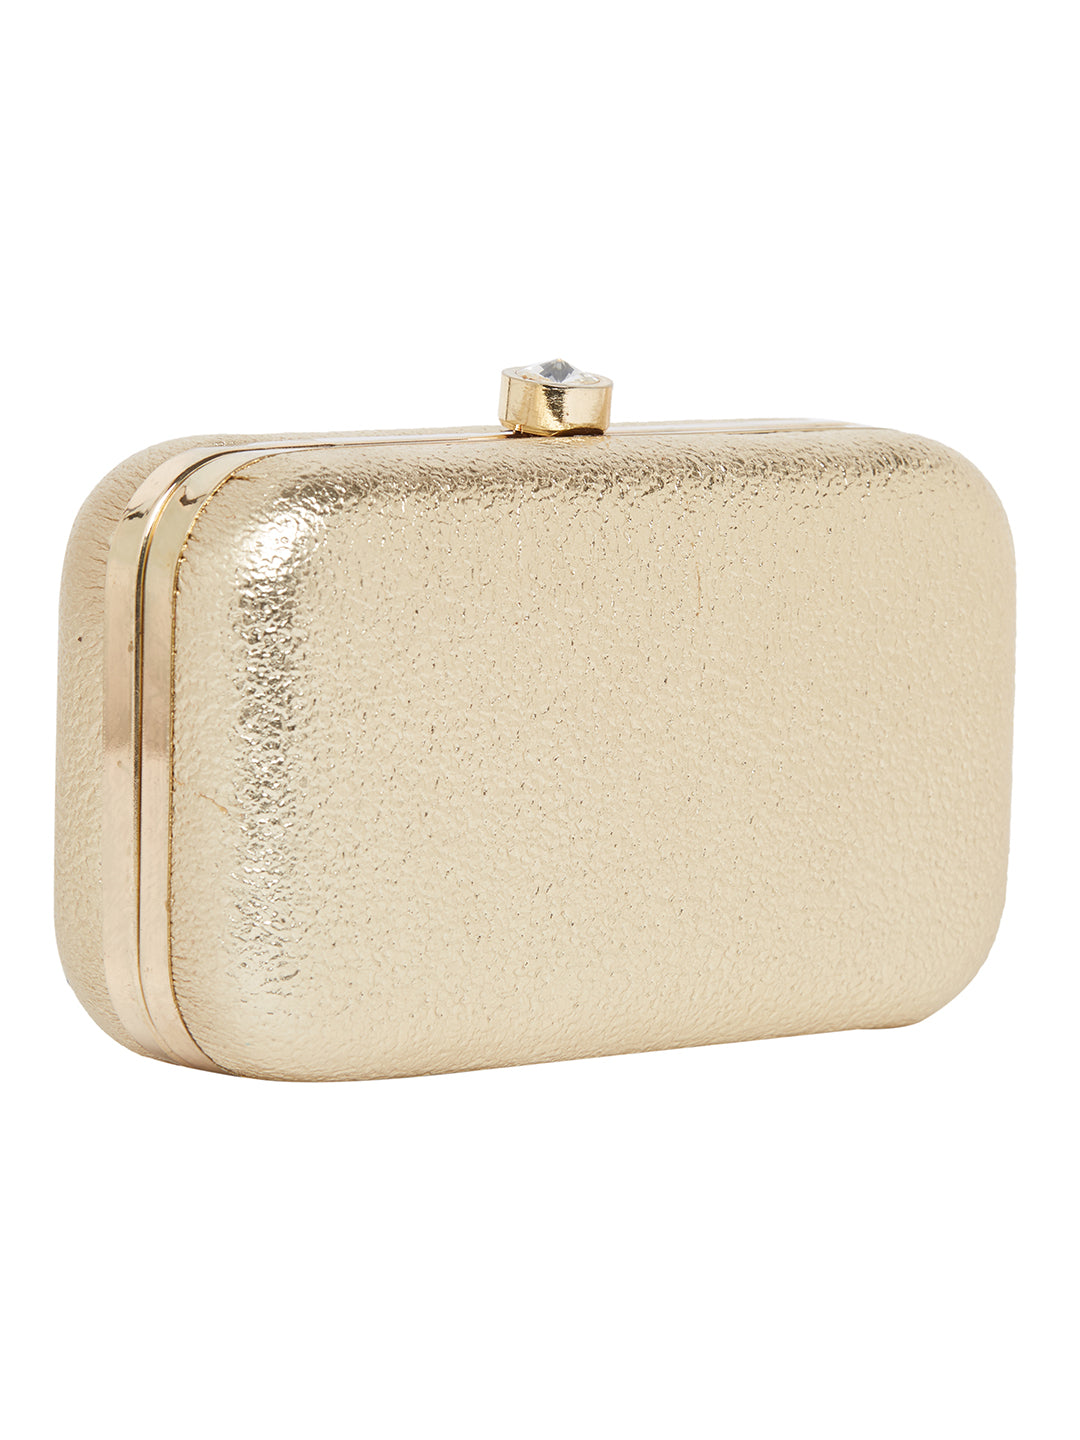 A Vdesi Base gold clutch bag on a white background.